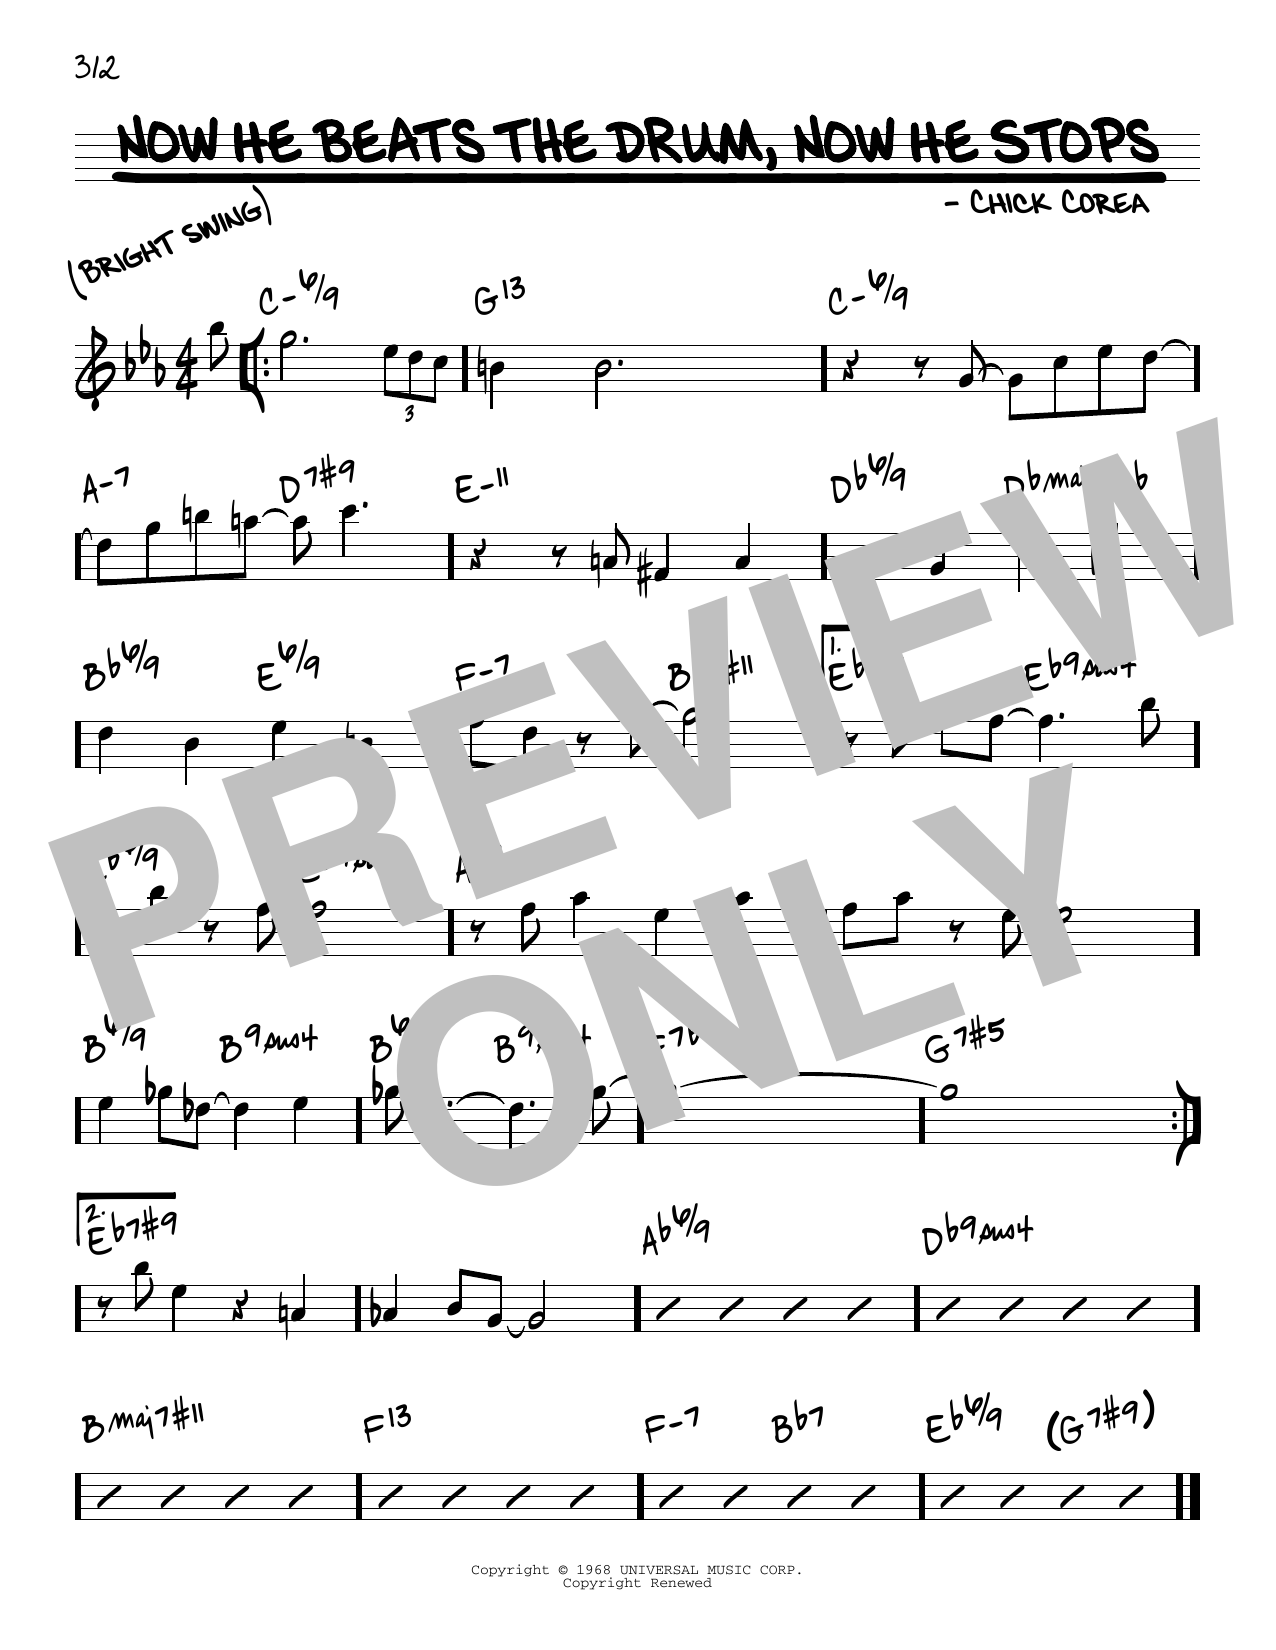 Download Chick Corea Now He Beats The Drum, Now He Stops Sheet Music